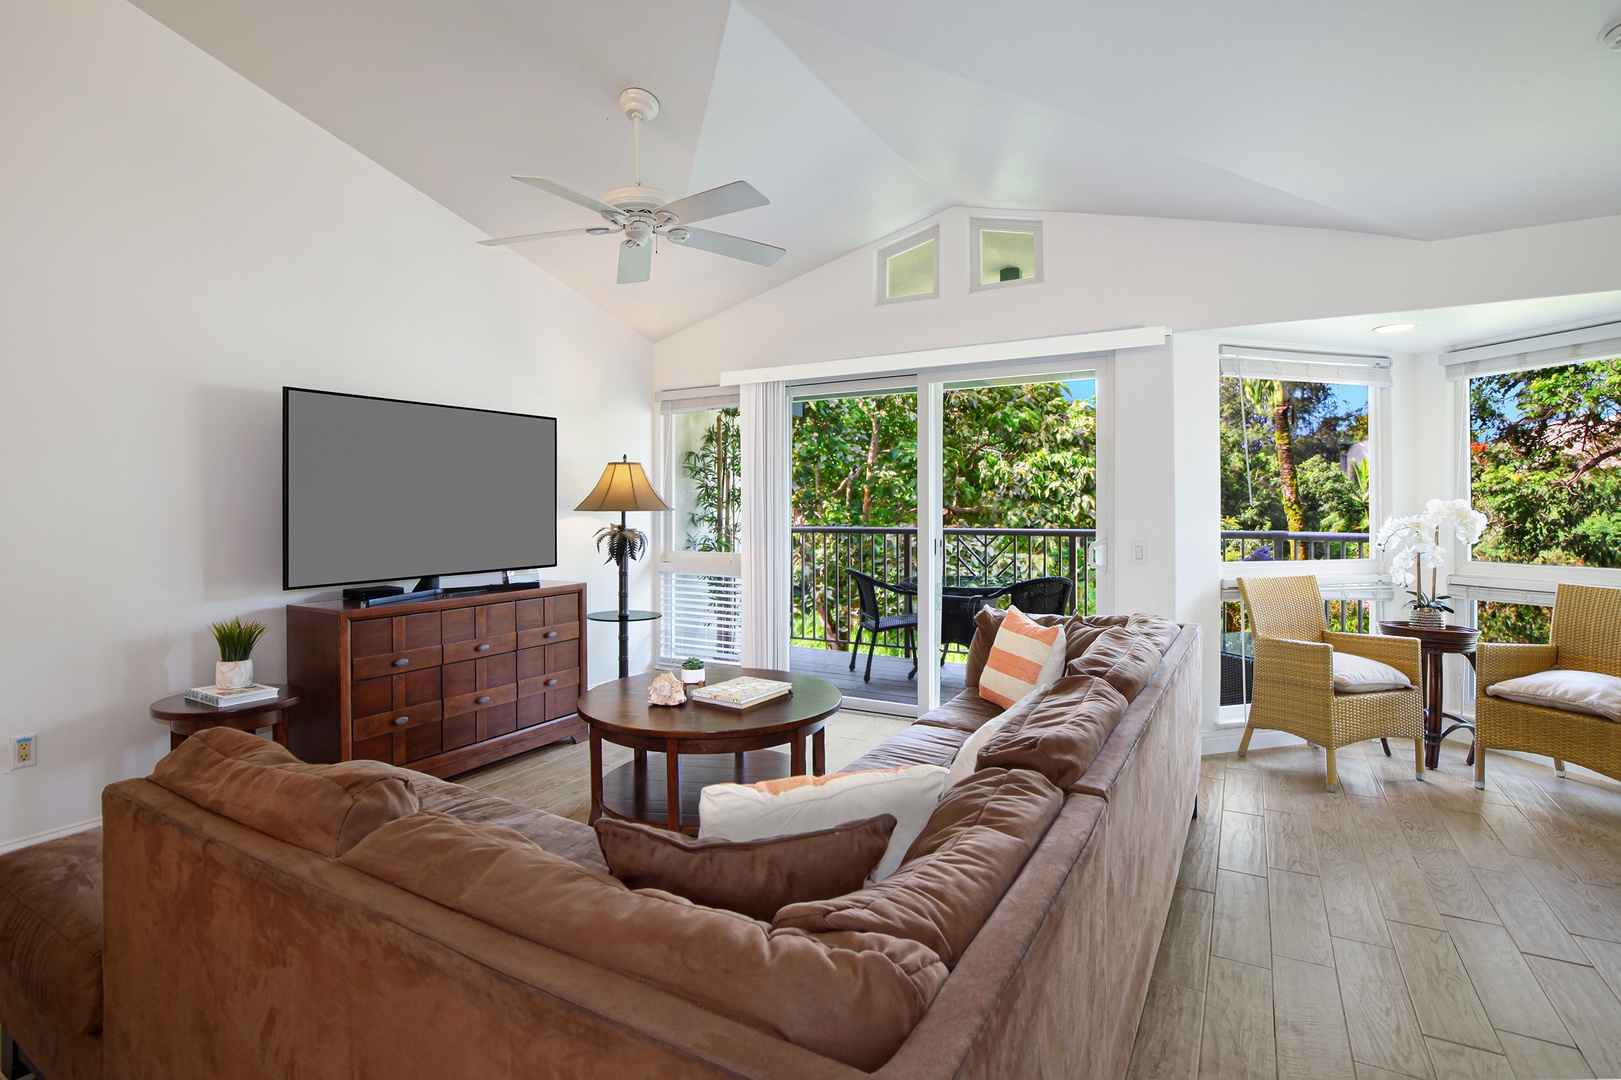 Princeville Vacation Rentals, Villas of Kamalii #35 - Cozy living area with a gorgeous garden views